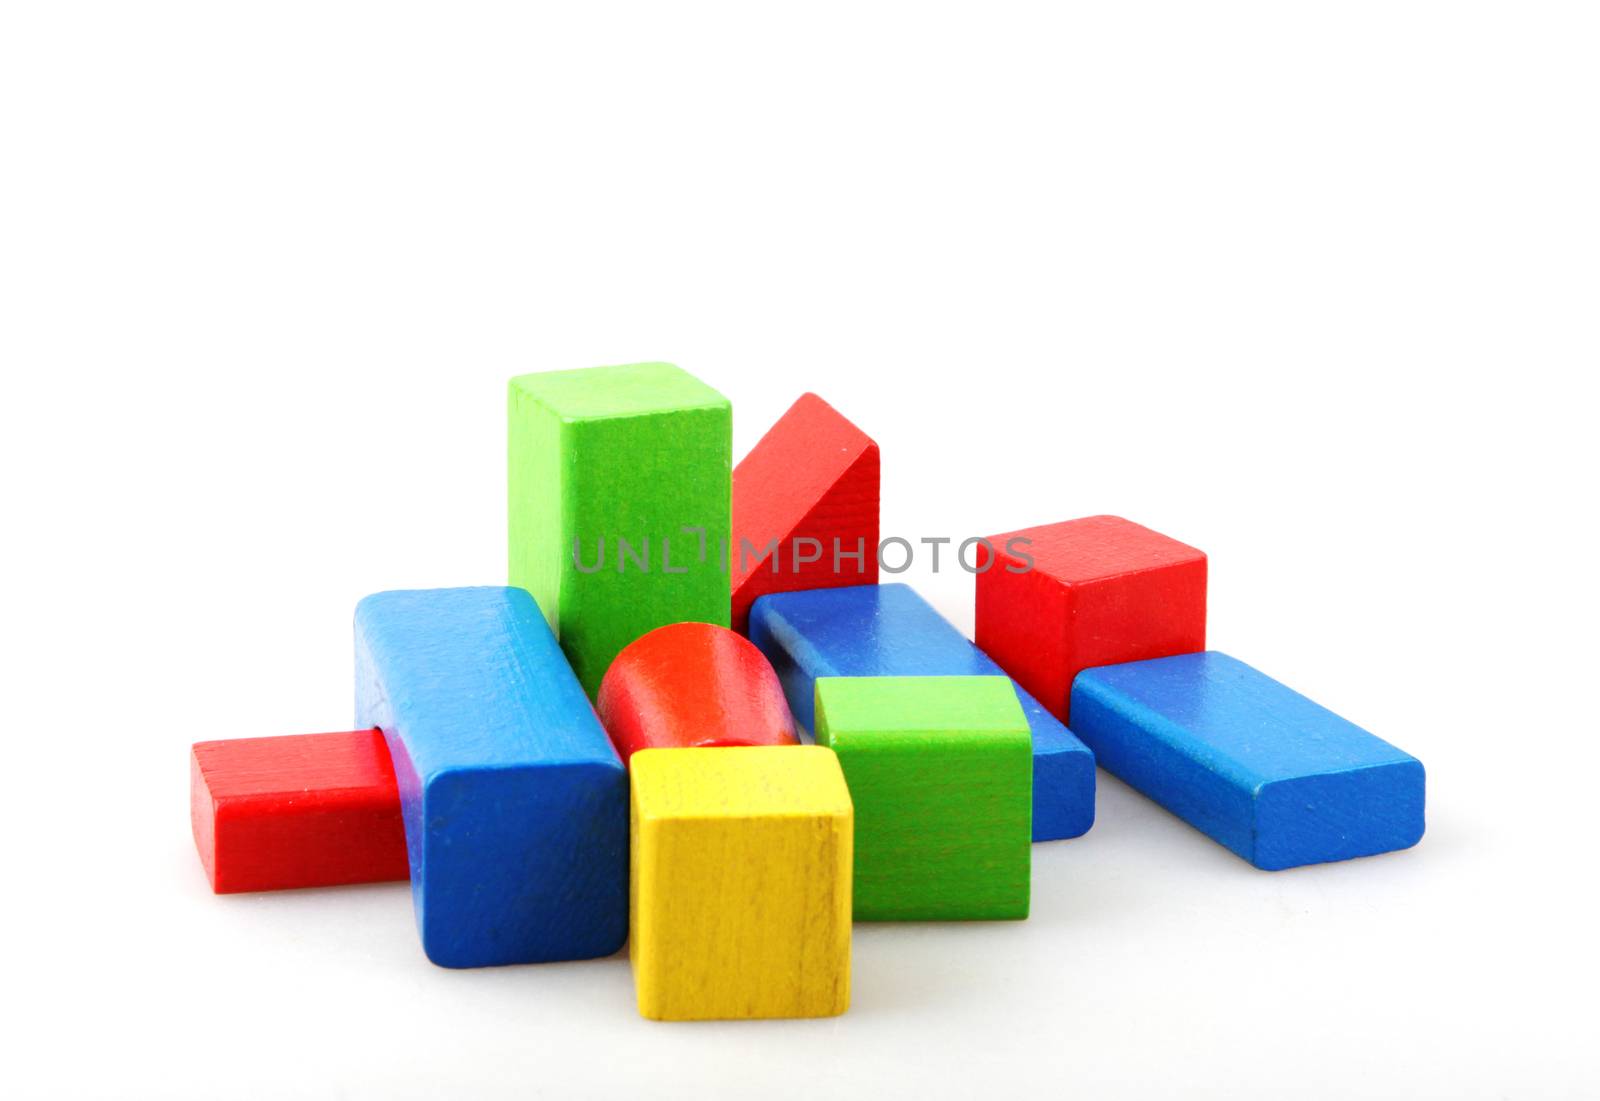 Studio Shot Of Colorful Toy Blocks Against White Background by nenovbrothers